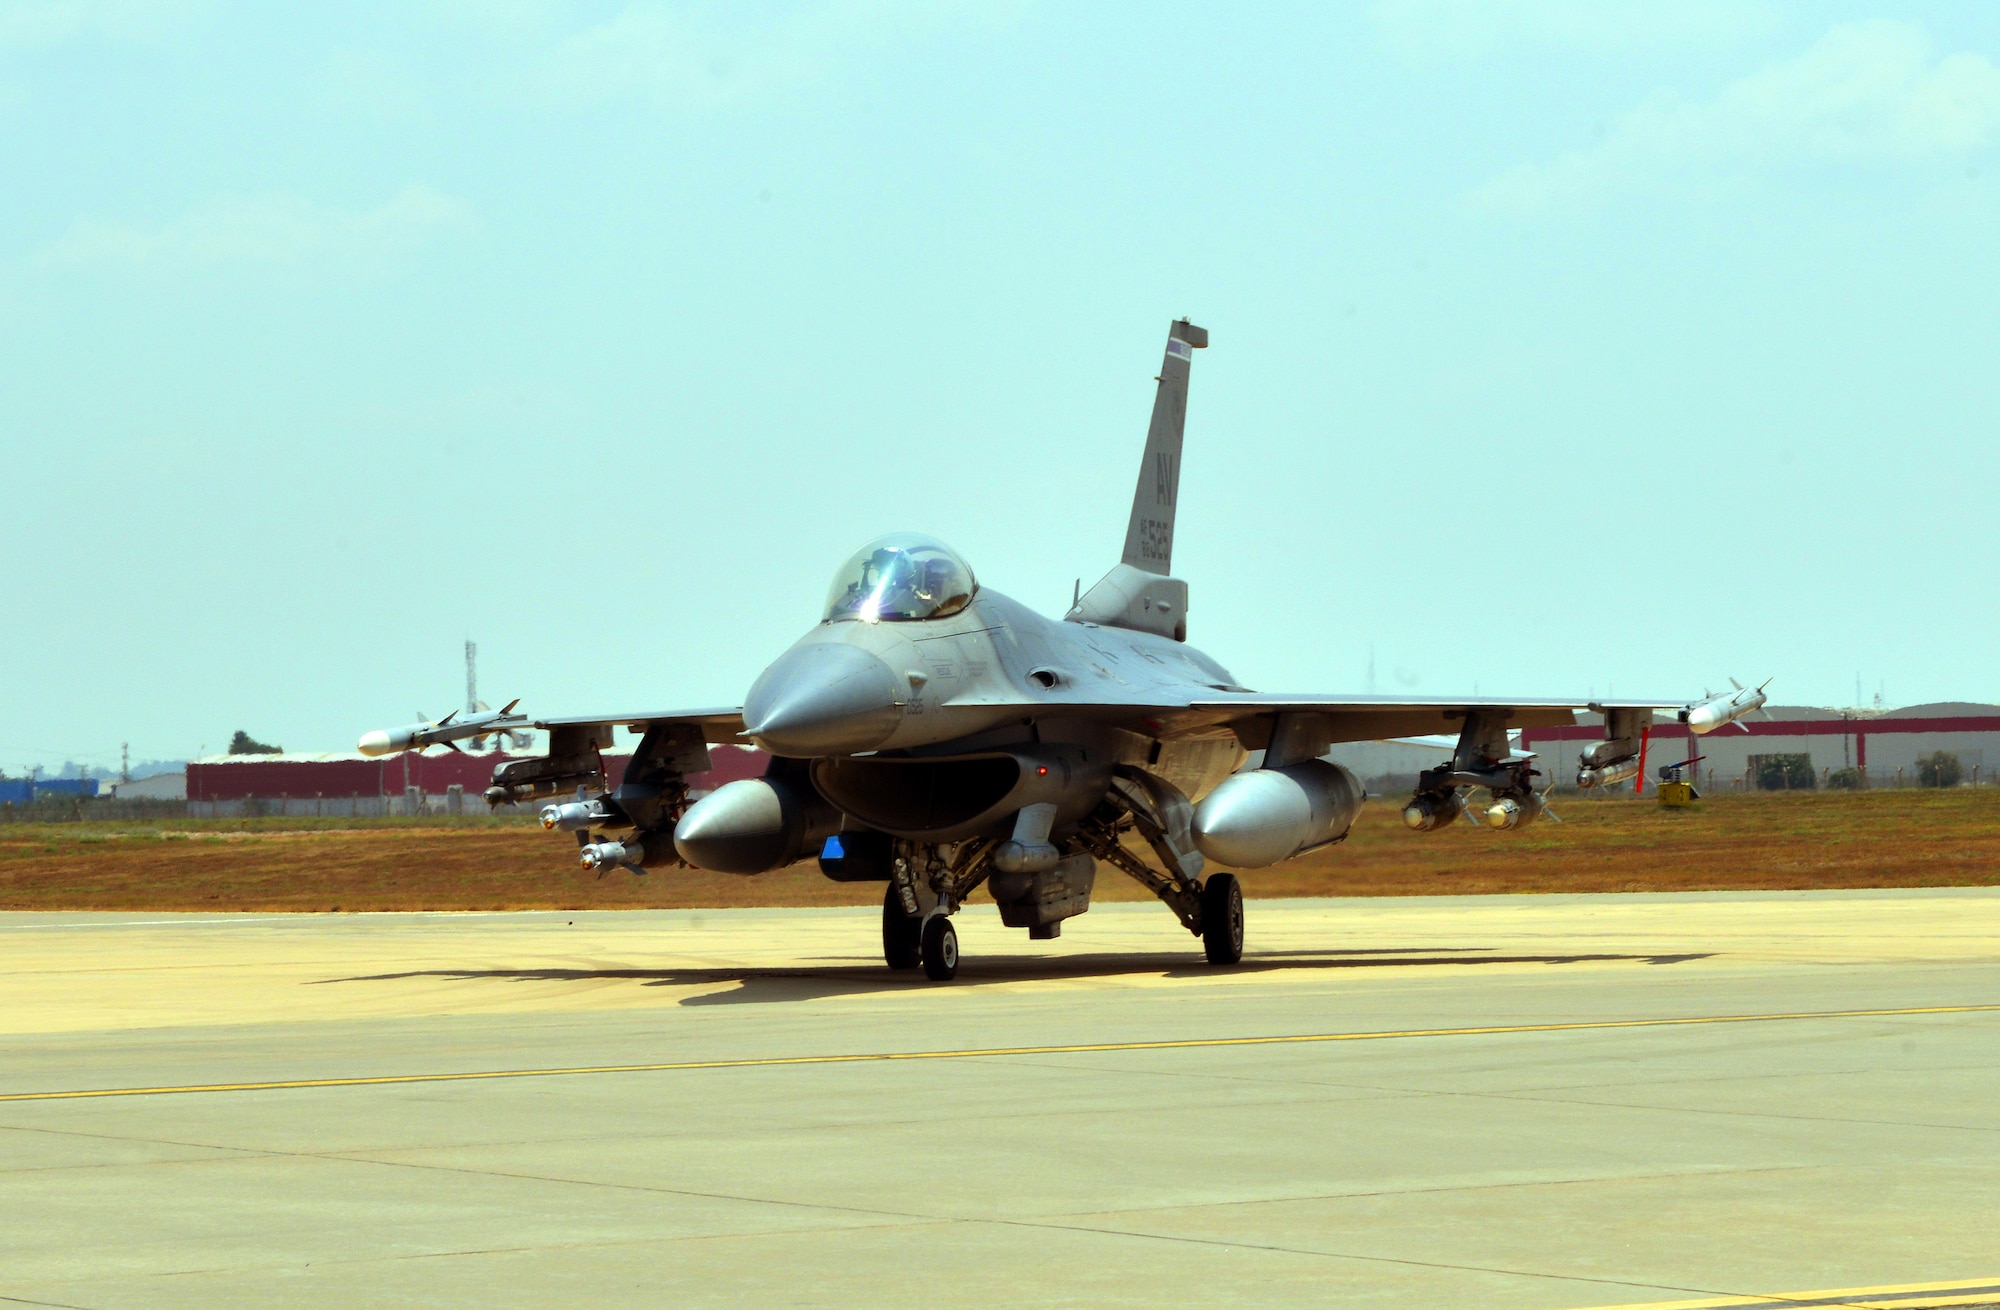 The U.S. Air Force deployed six F-16 Fighting Falcons from Aviano Air Base, Italy, support equipment and approximately 300 personnel to Incirlik Air Base, Turkey in support of Operation Inherent Resolve Aug. 9, 2015. This follows Turkey’s decision to host the deployment of U.S. aircraft conducting counter-ISIL operations. The U.S. and Turkey, as members of the 60-plus nation coalition, are committed to the fight against ISIL in pursuit of peace and stability in the region. (U.S. Air Force photo Senior Airman Michael Battles/Released)